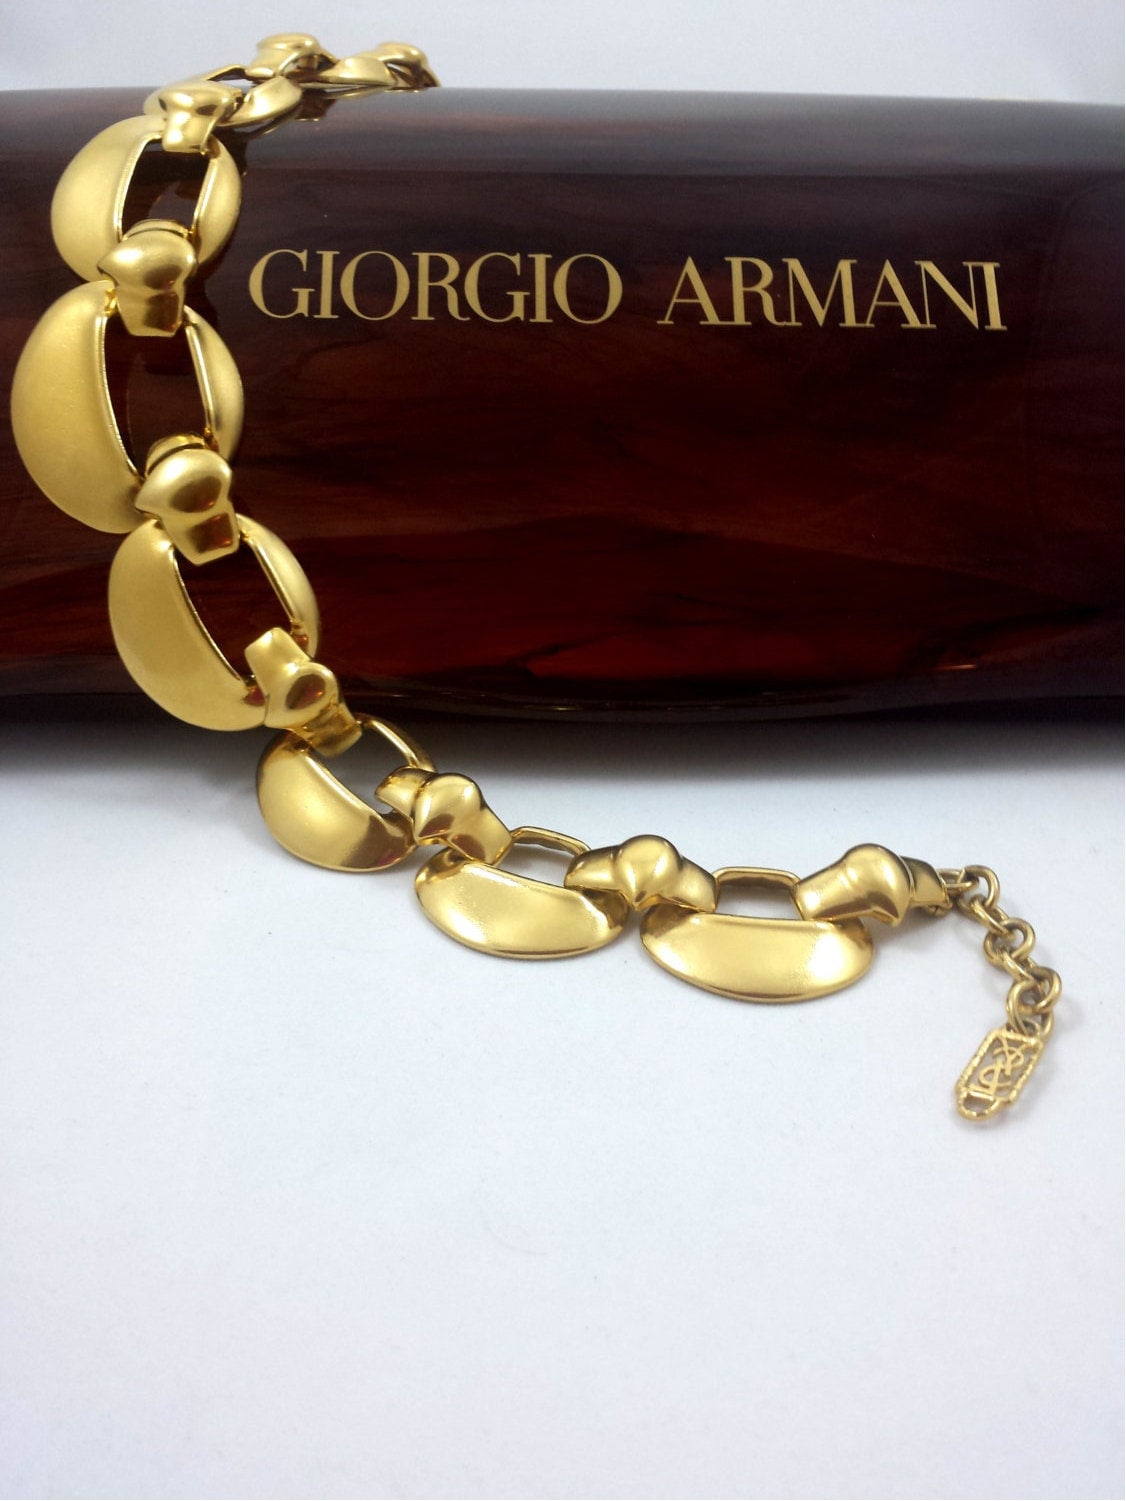 Vintage CHANEL Gold Toned No 19 Perfume Chain Necklace For Sale at 1stDibs